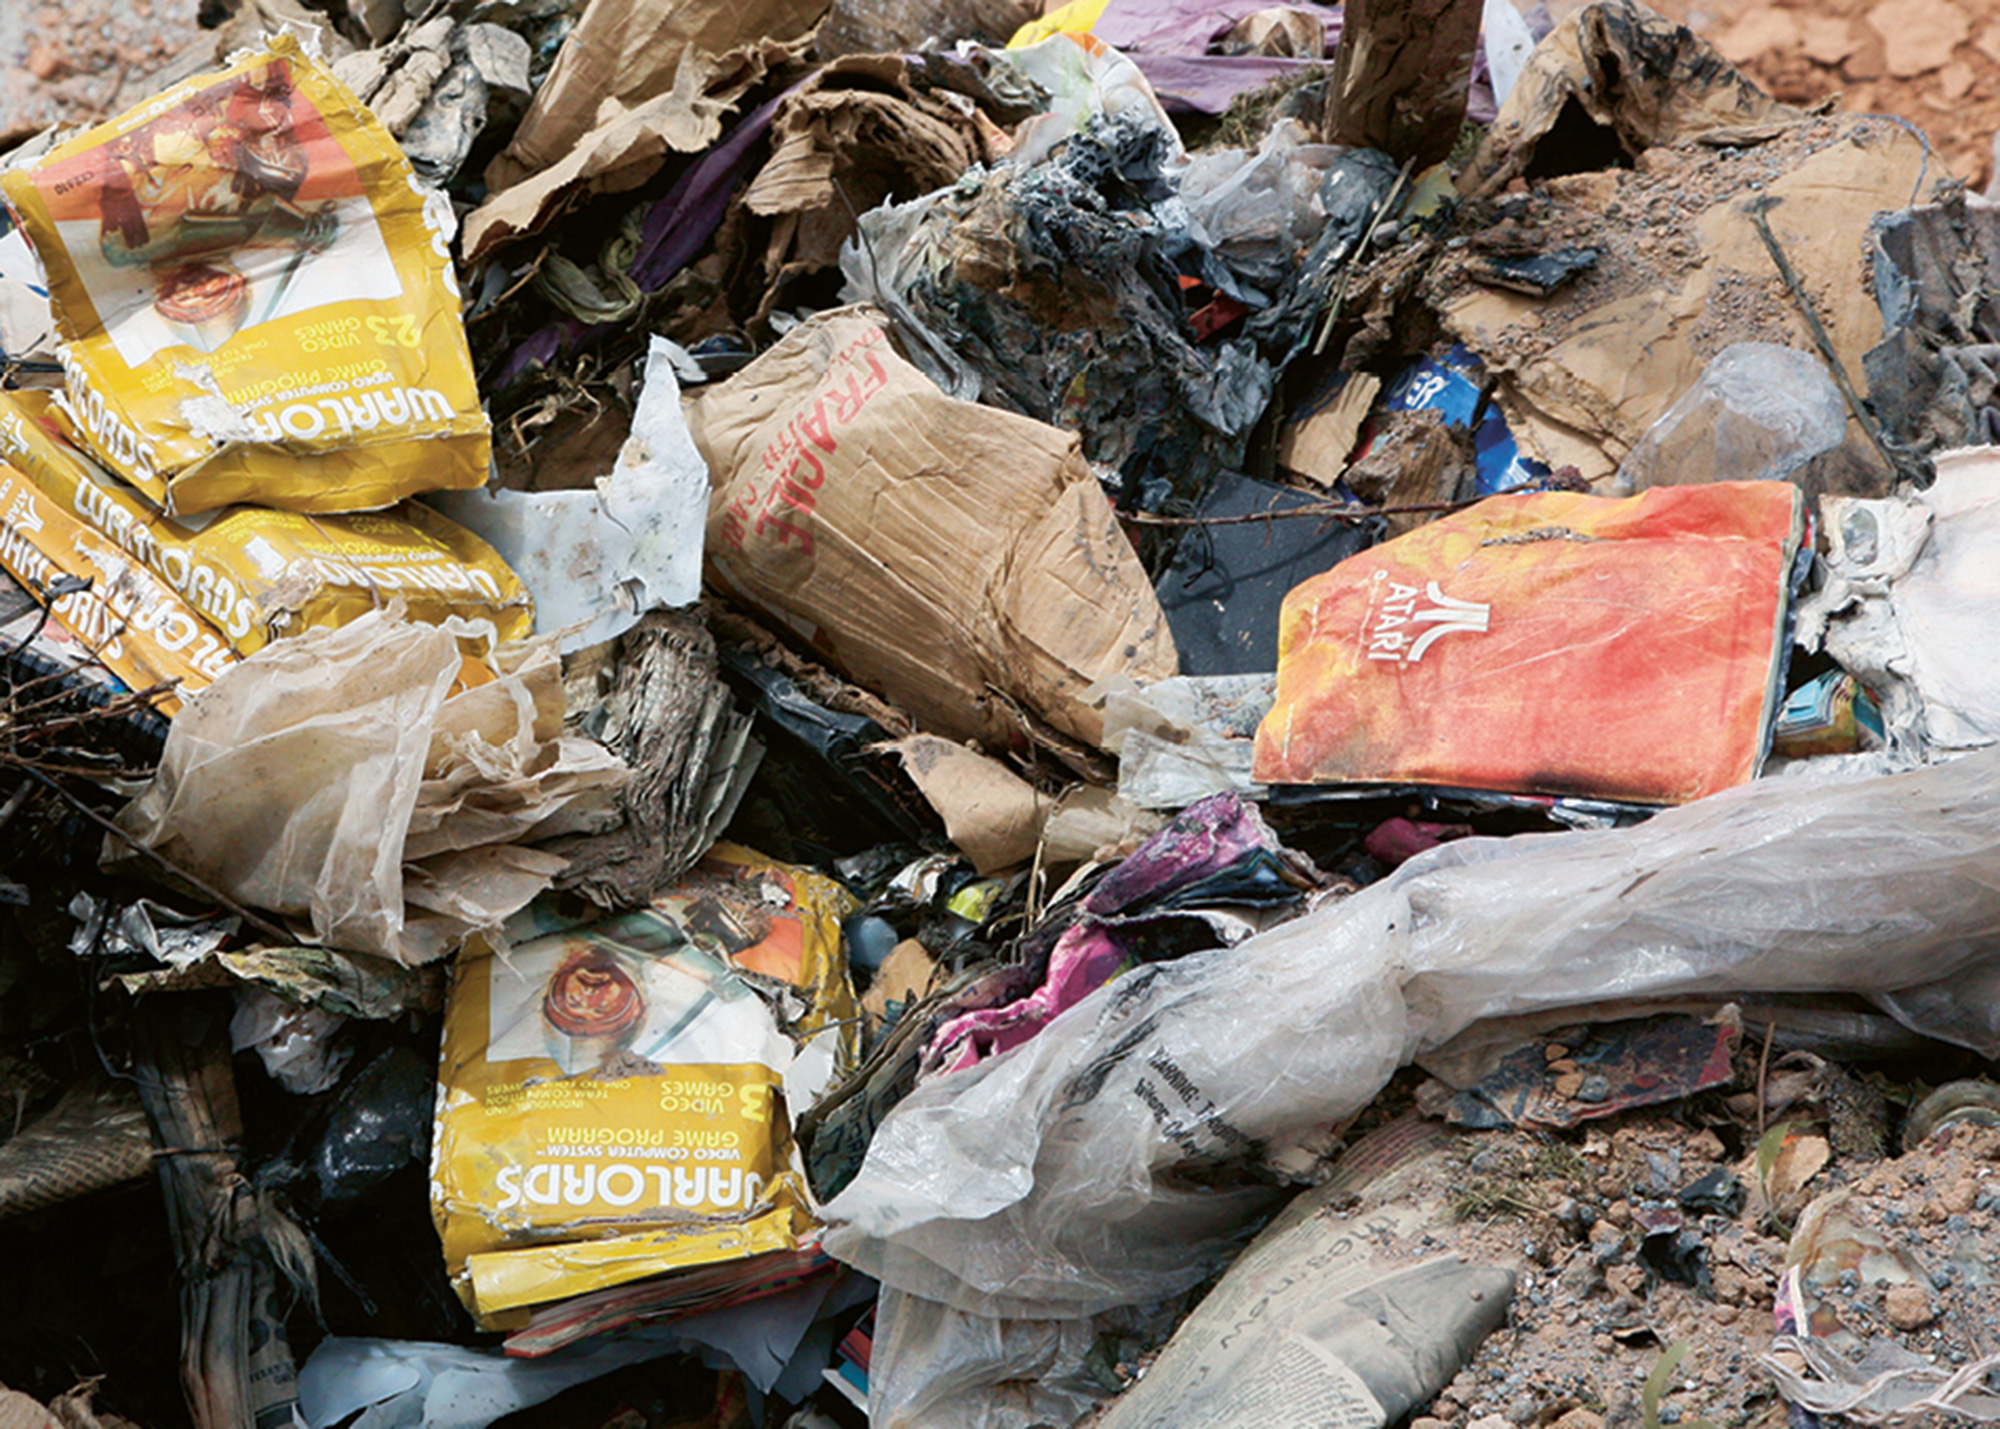 A photograph of discarded merchandise at the Atari Incorporated landfill site in Alamogordo, New Mexico.